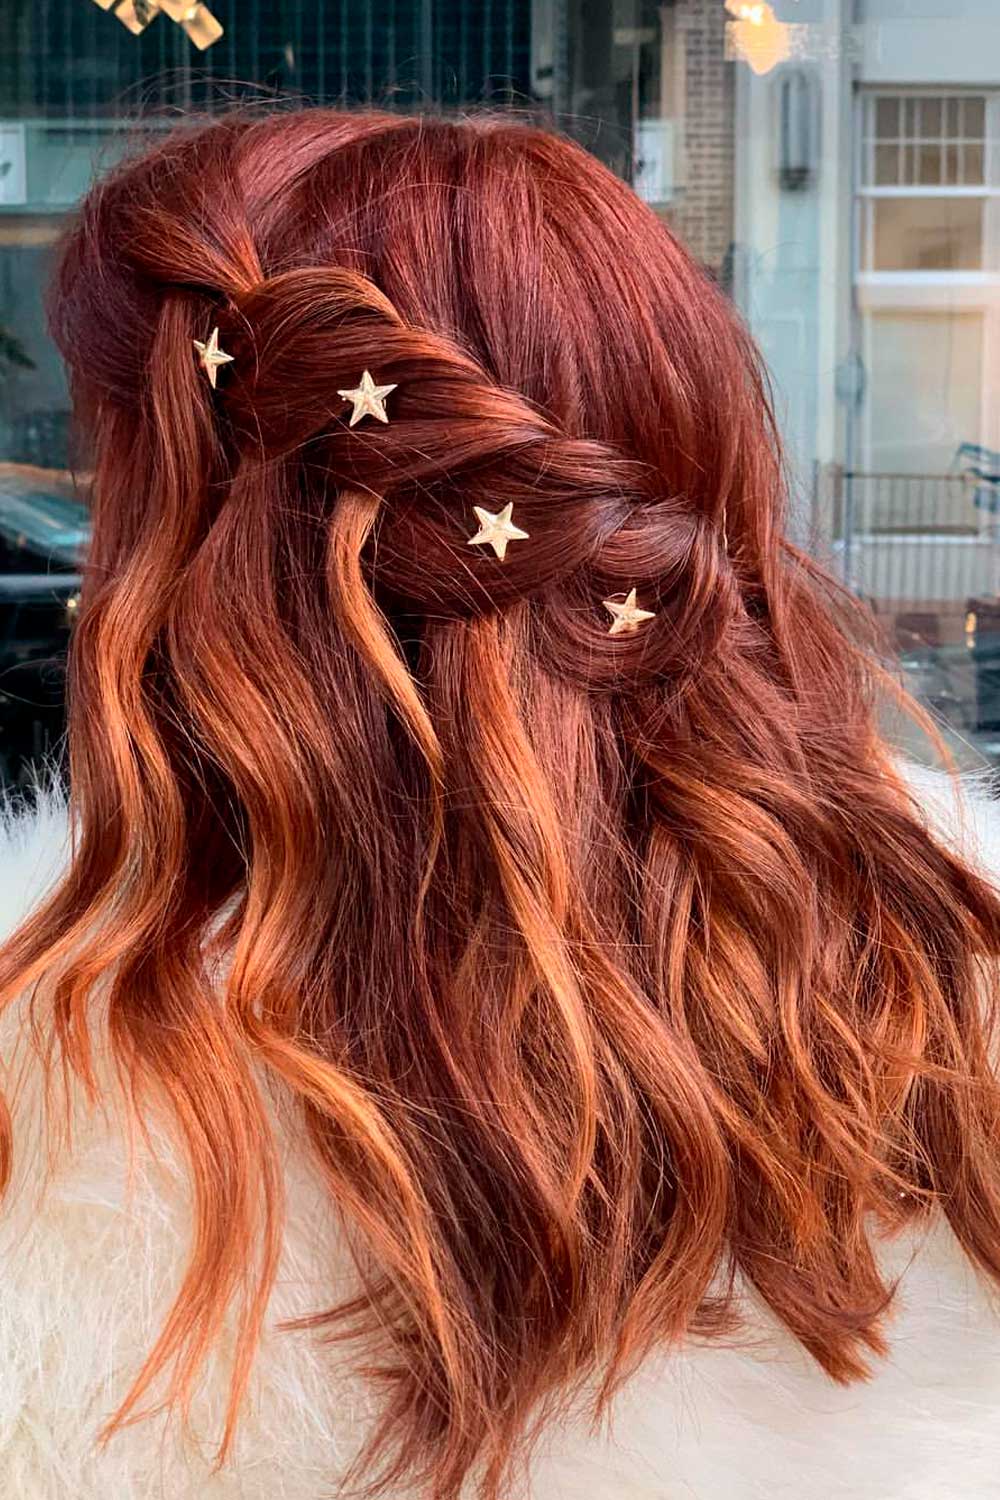 This hair accessory comes in really handy for those who prefer easy Christmas hairstyles